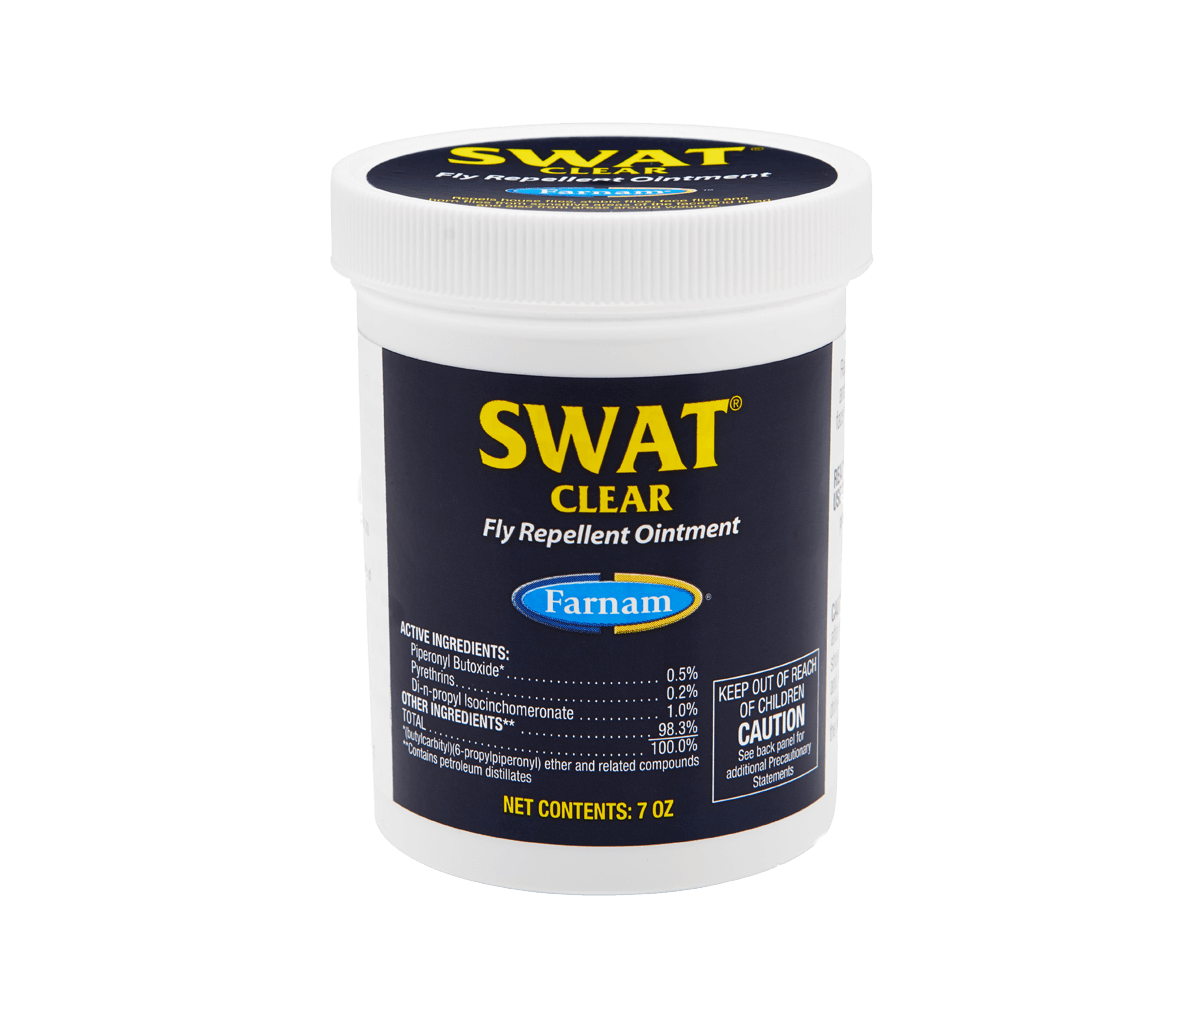 SWAT Clear Fly Repellent Cream